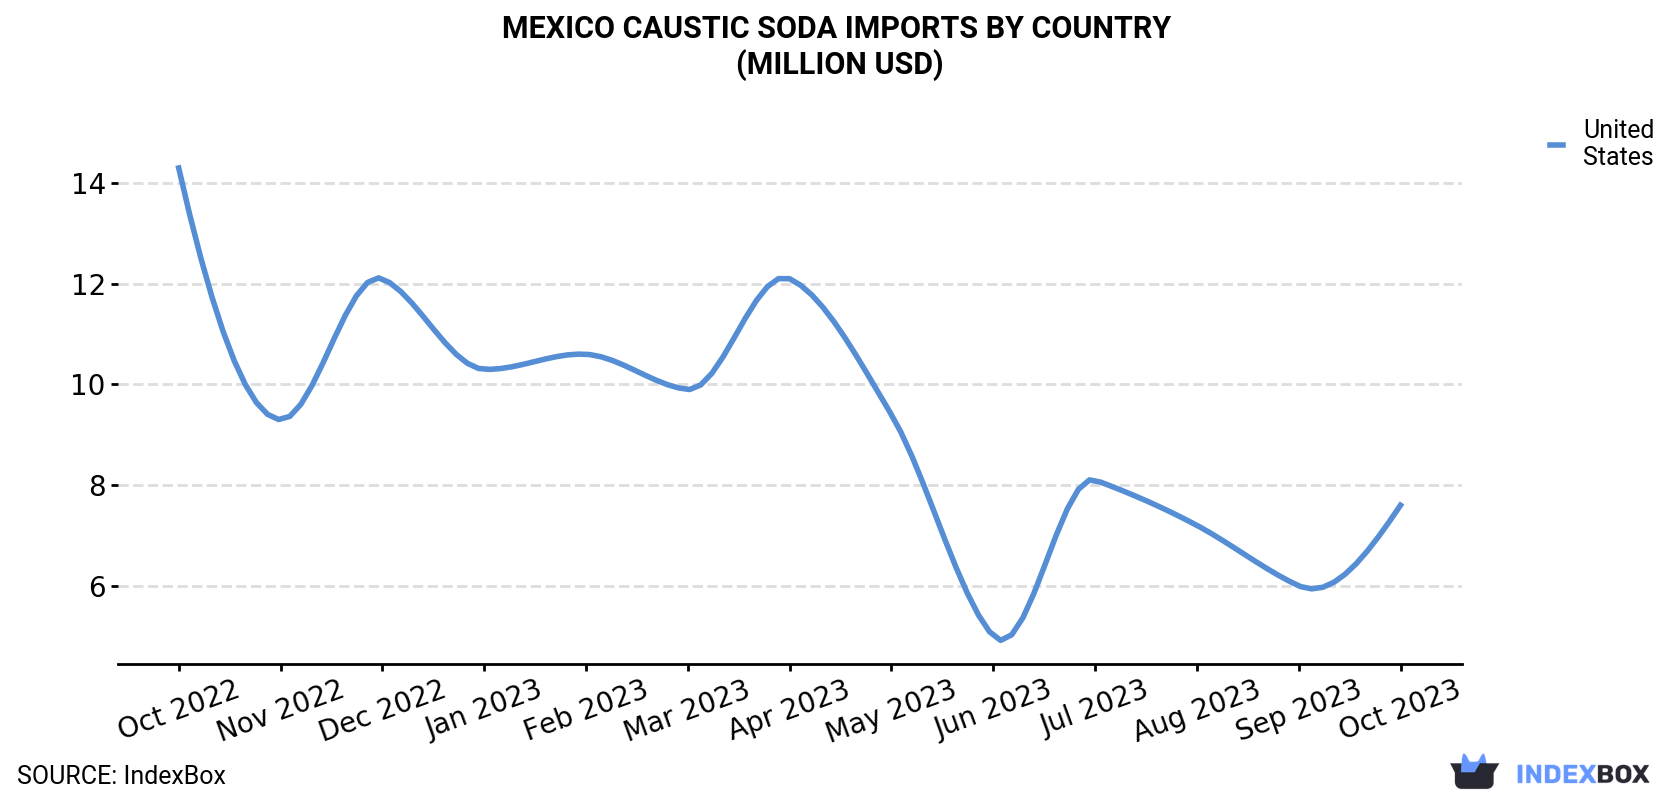 Mexico Caustic Soda Imports By Country (Million USD)